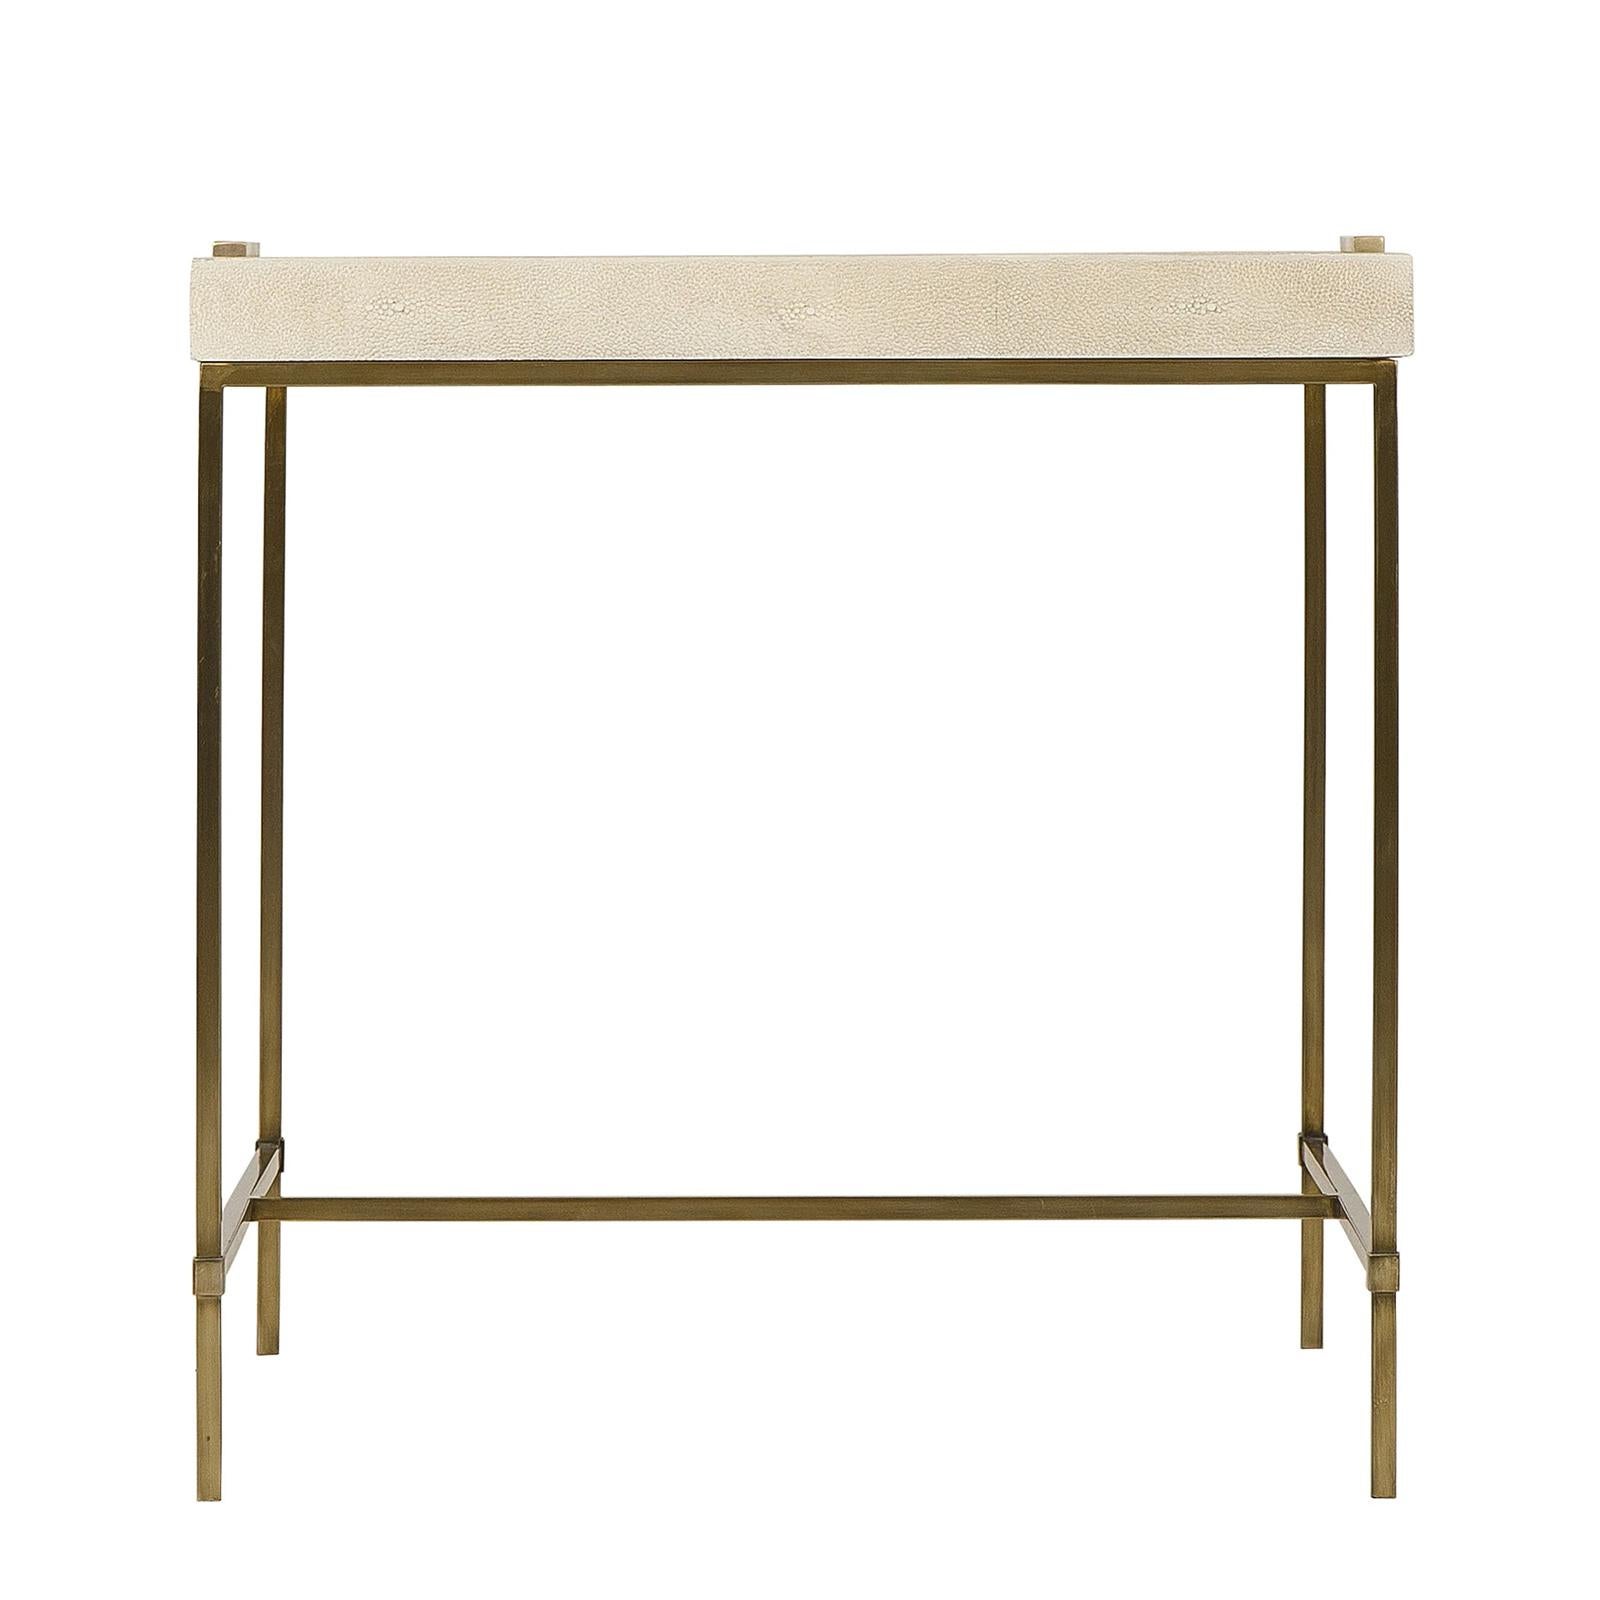 Side table Shagry cream with base in stainless steel
 in brass finish. With top in poplar wood covered with 
cream shagreen.